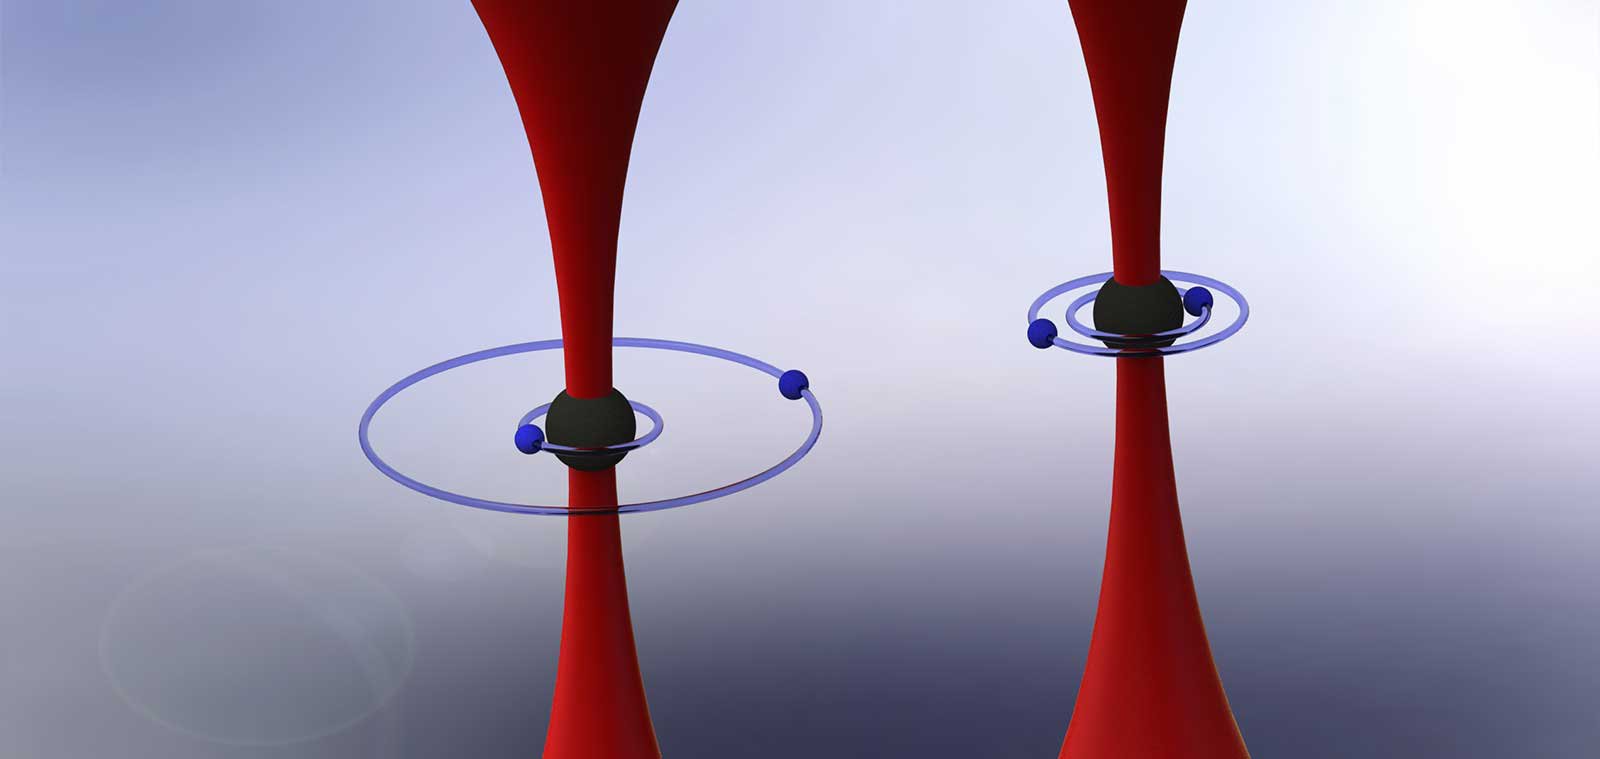 This illustration represents two entangled qubits, in which the qubits are individually controlled strontium atoms